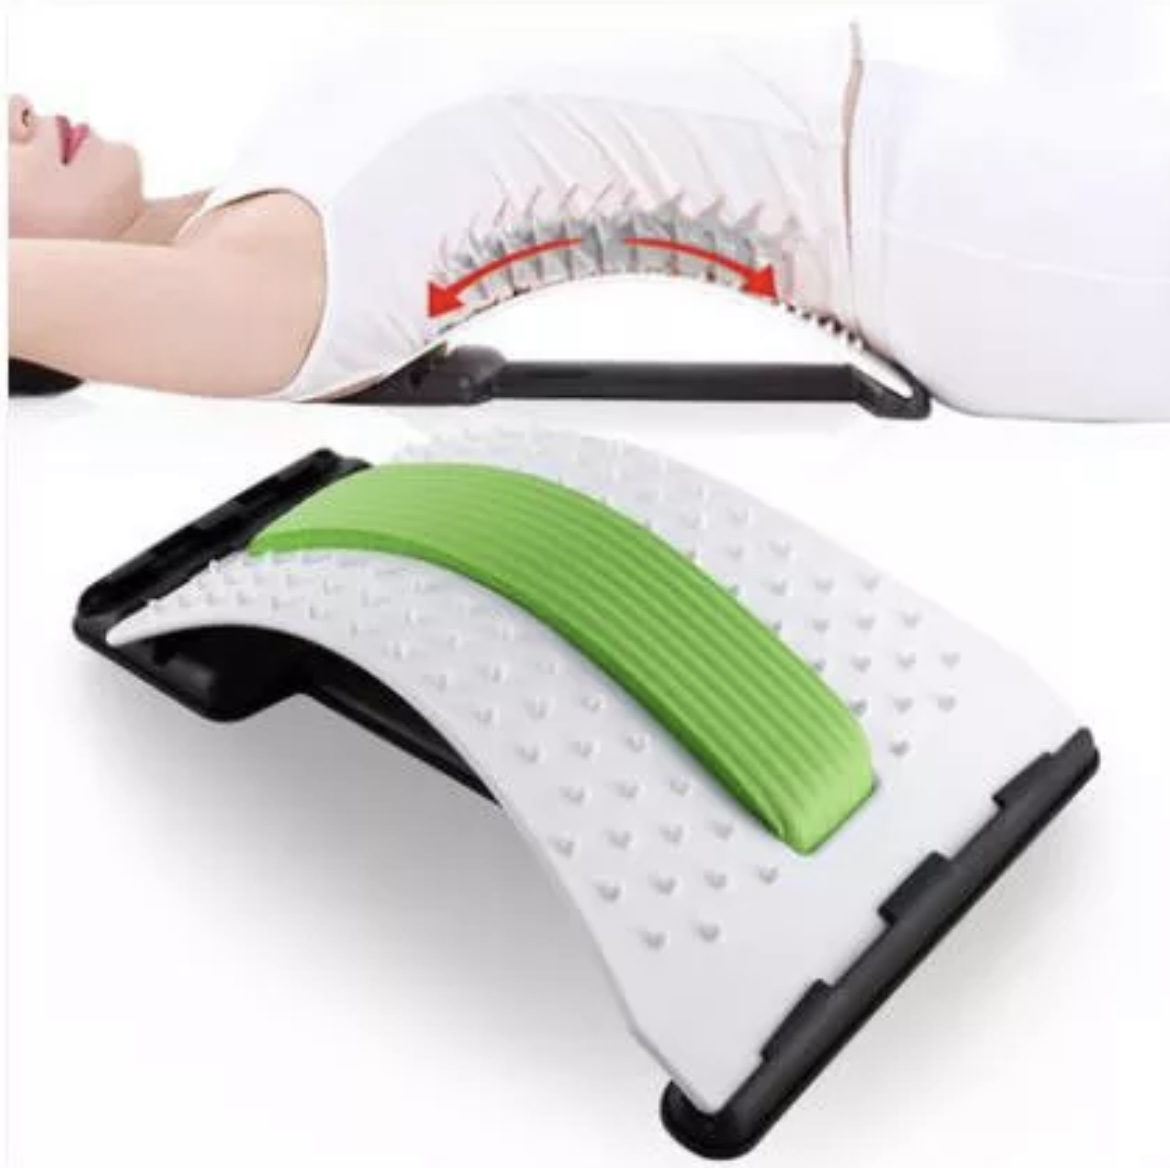 Back Massage Stretcher Lumbar Spine Support Massage Mate Relaxation Fitness Stretch Tool Pain Relieve 3 Color Fitness Equipment